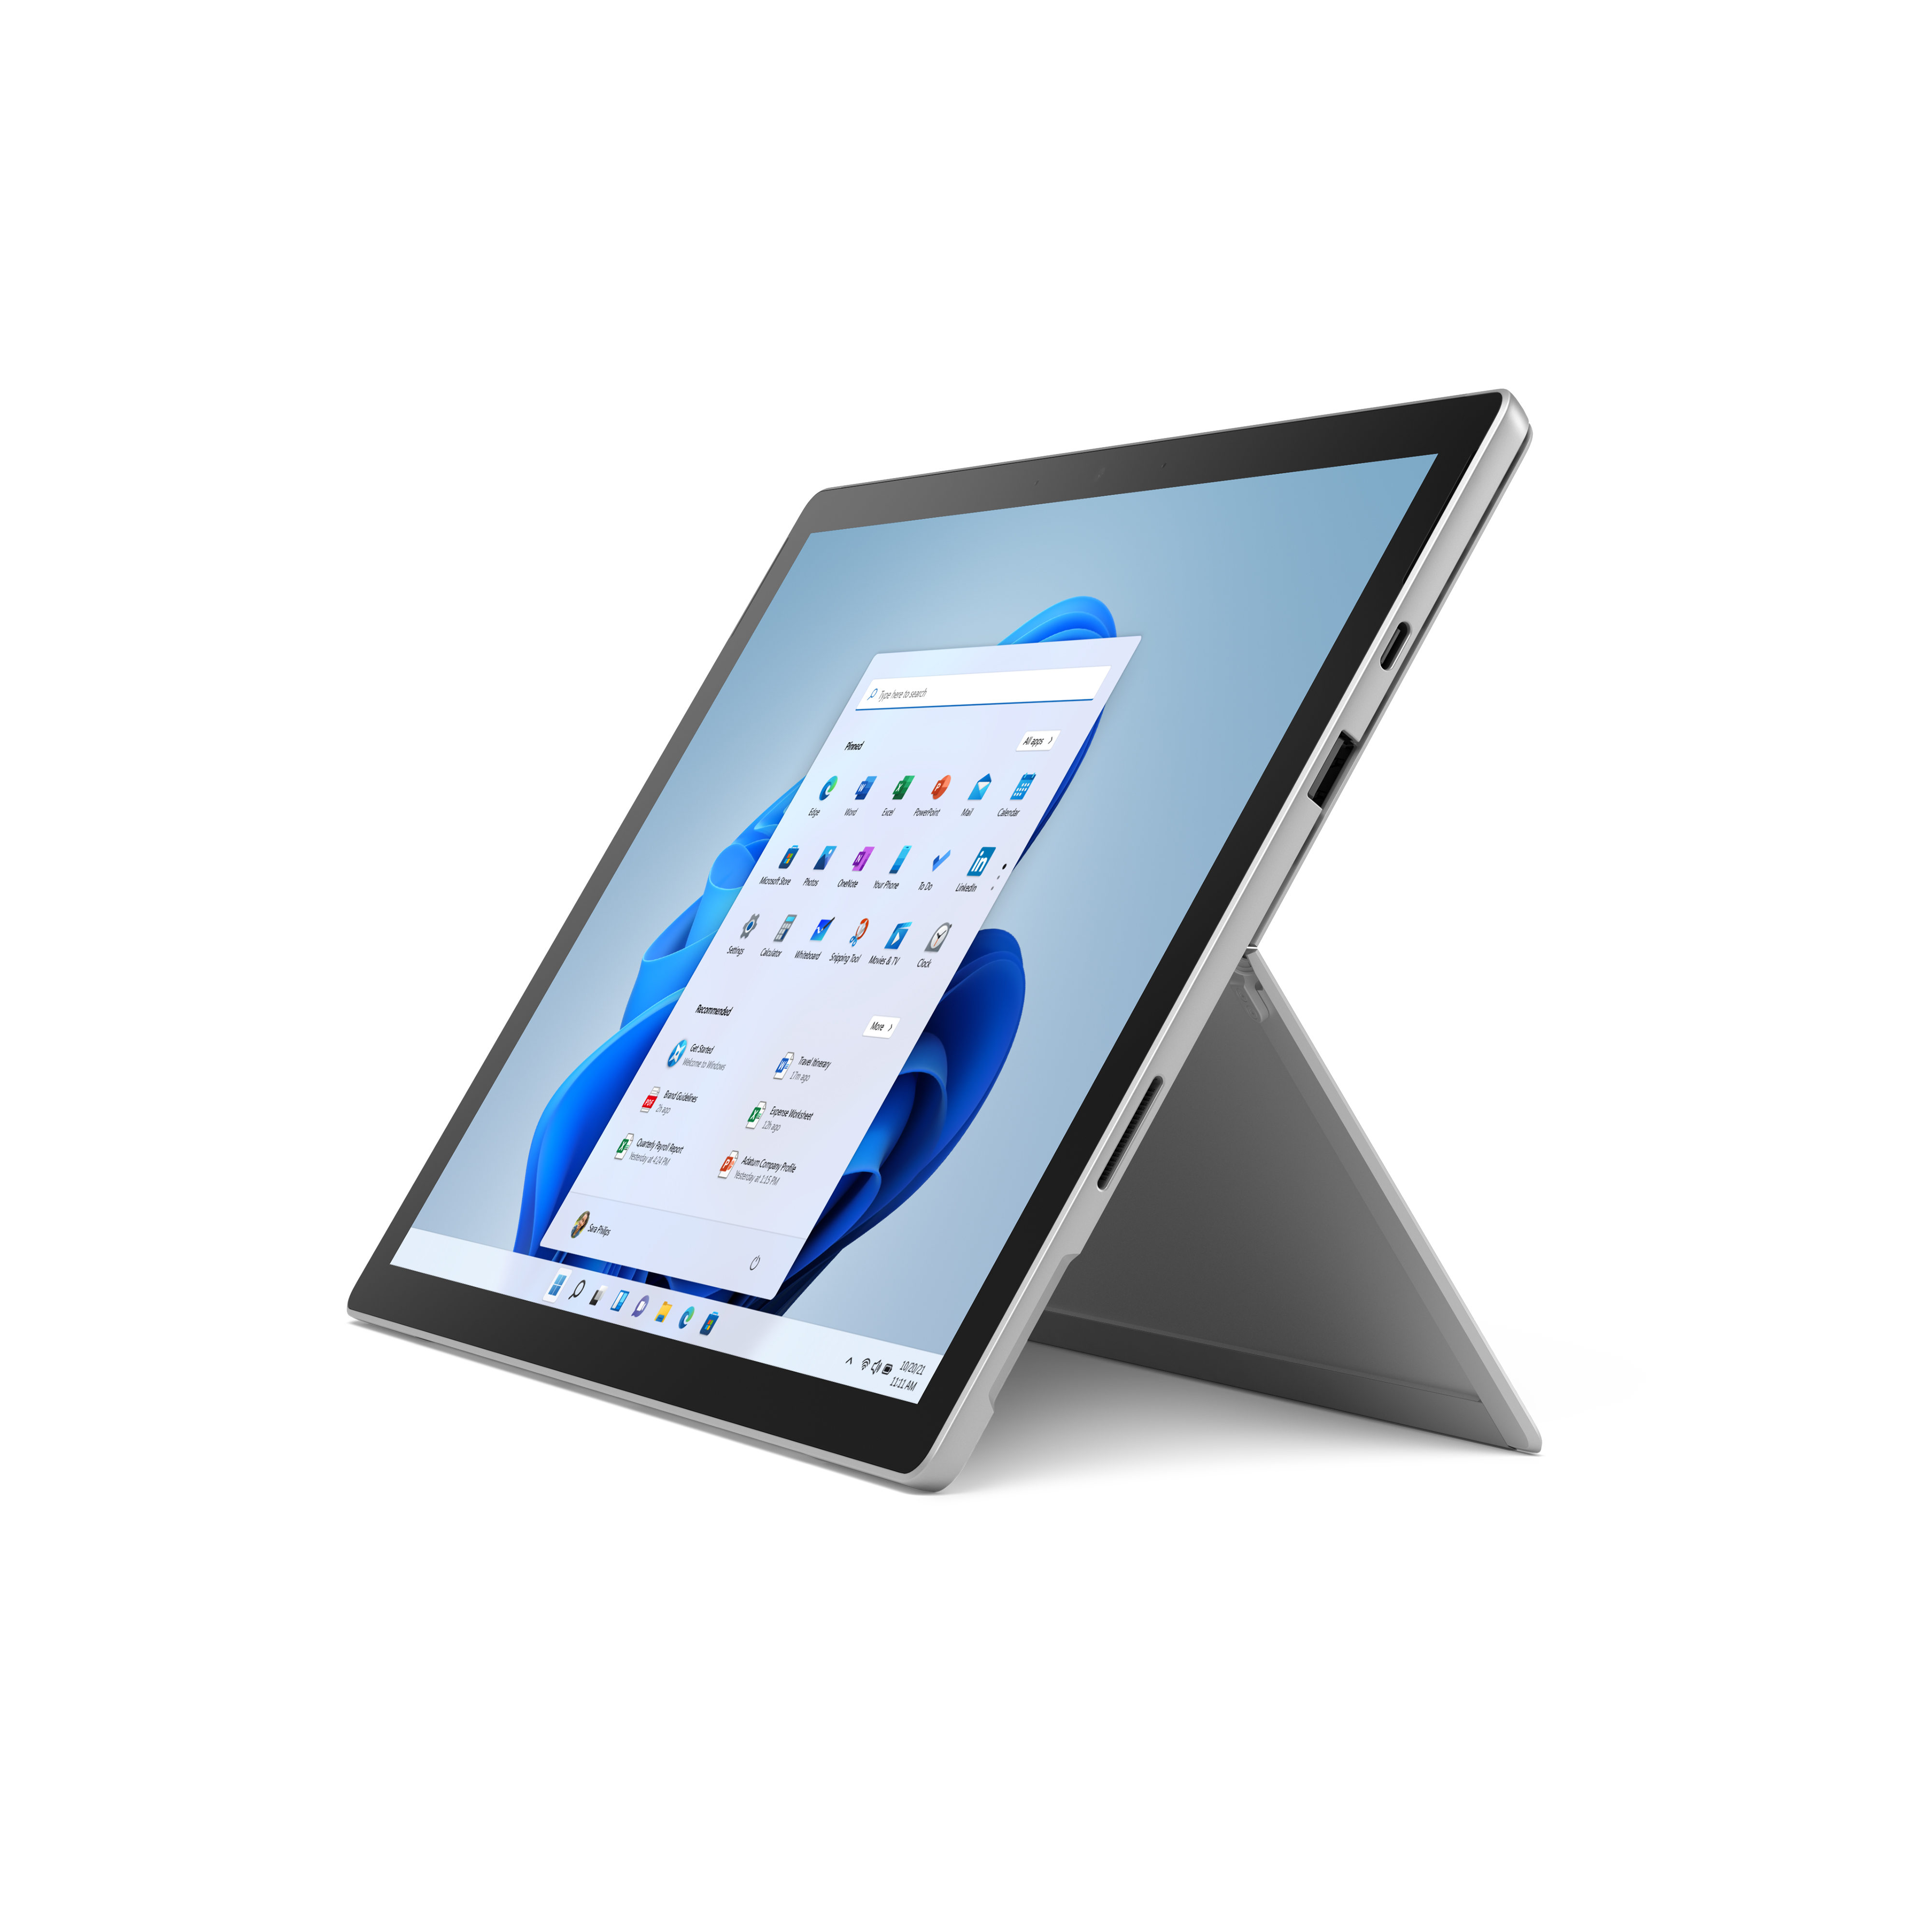 Microsoft Surface Pro 7+ 2-In-1, 12.3" Touch Screen, Intel Core i3, 8GB RAM, 128GB SSD, Windows 11 Home, Platinum, with Black Type Cover - image 5 of 8